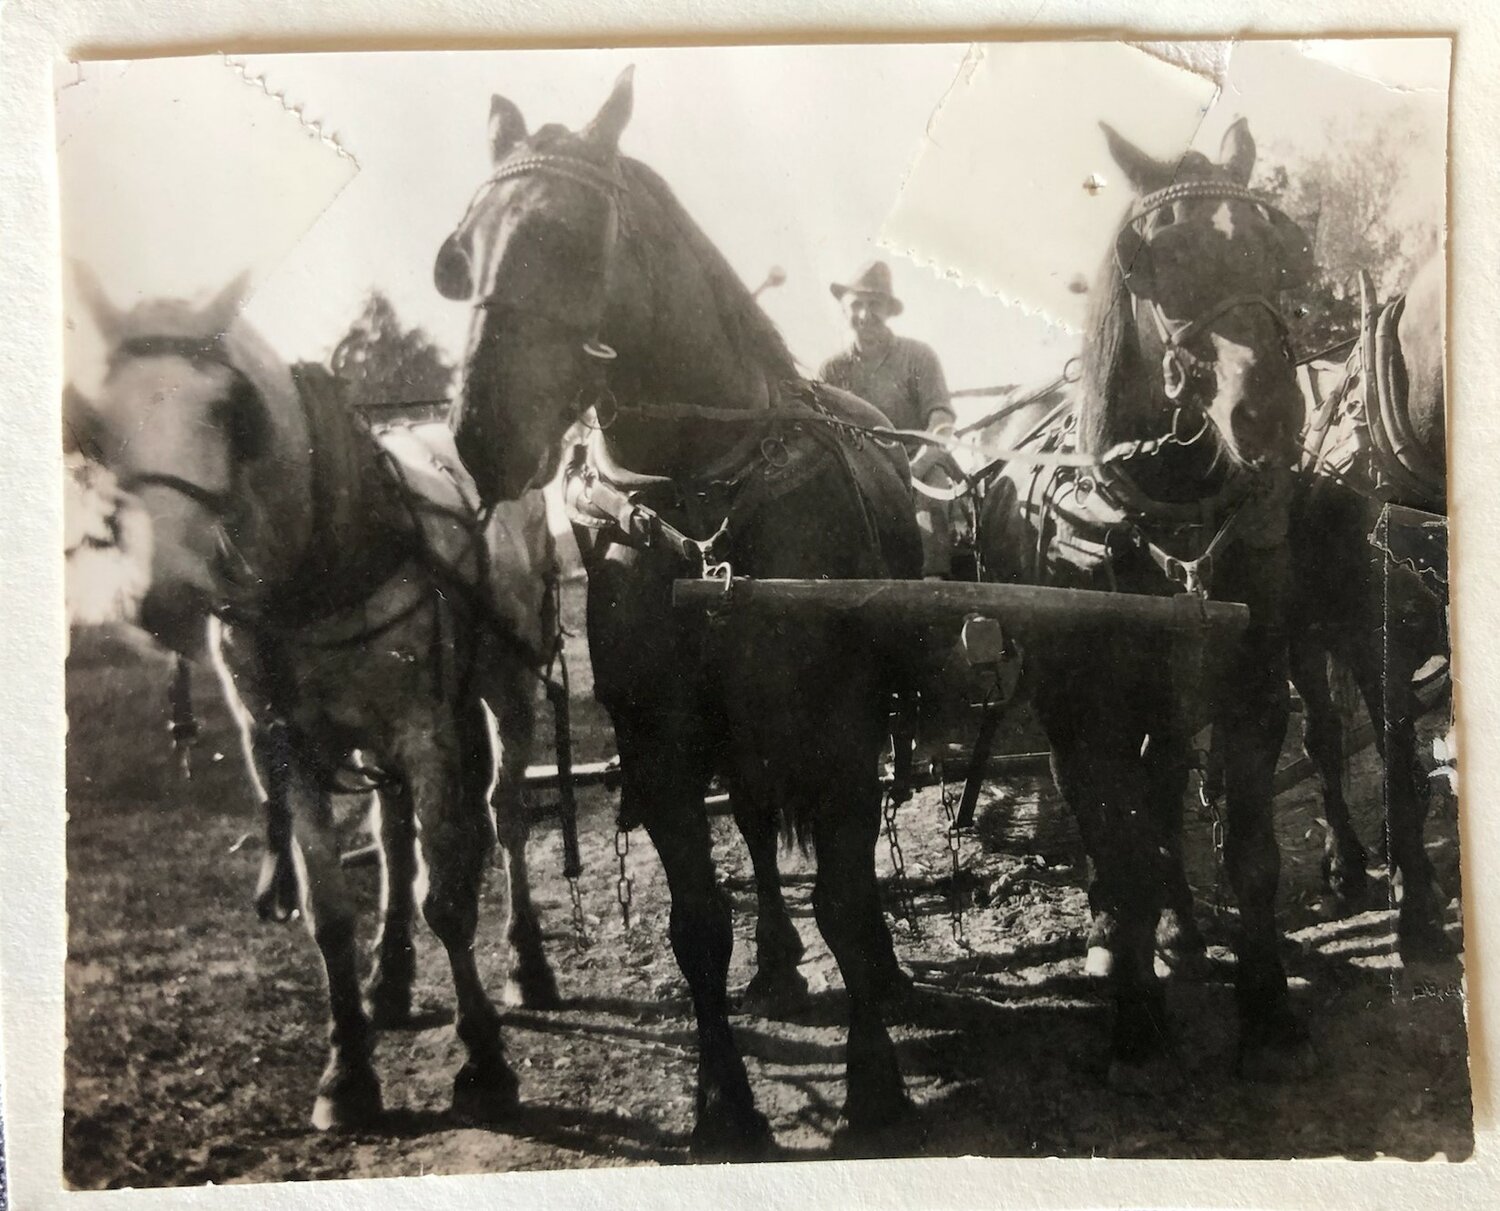 My great grandfather Norman with his four hitch team of horses